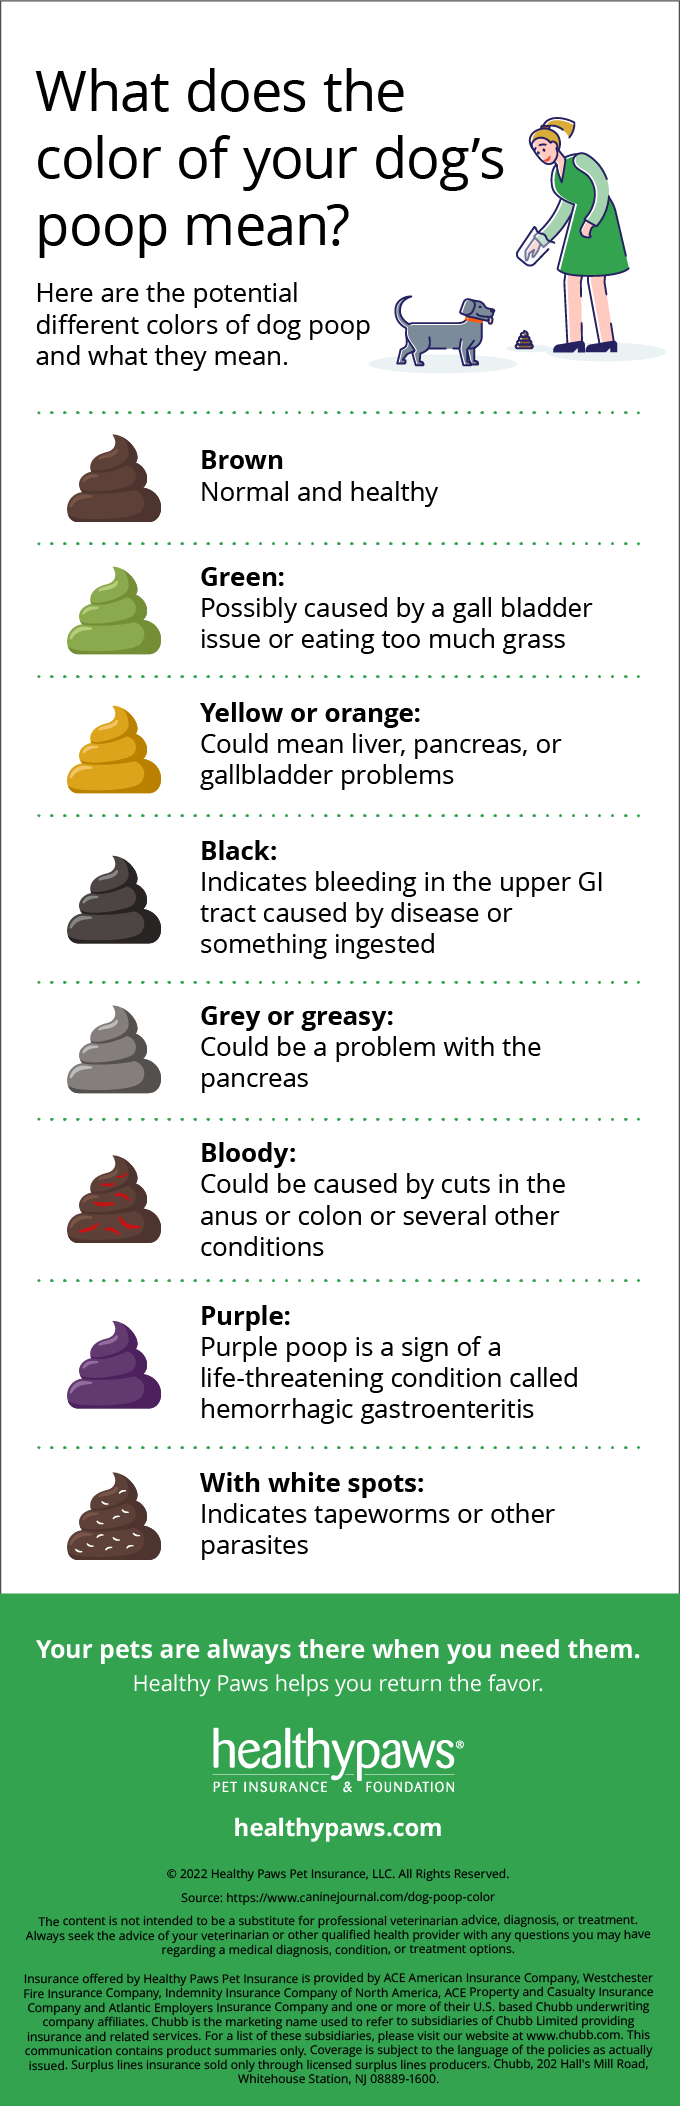 Dog Poop Color Chart Find Out What Each Color Means | tyello.com